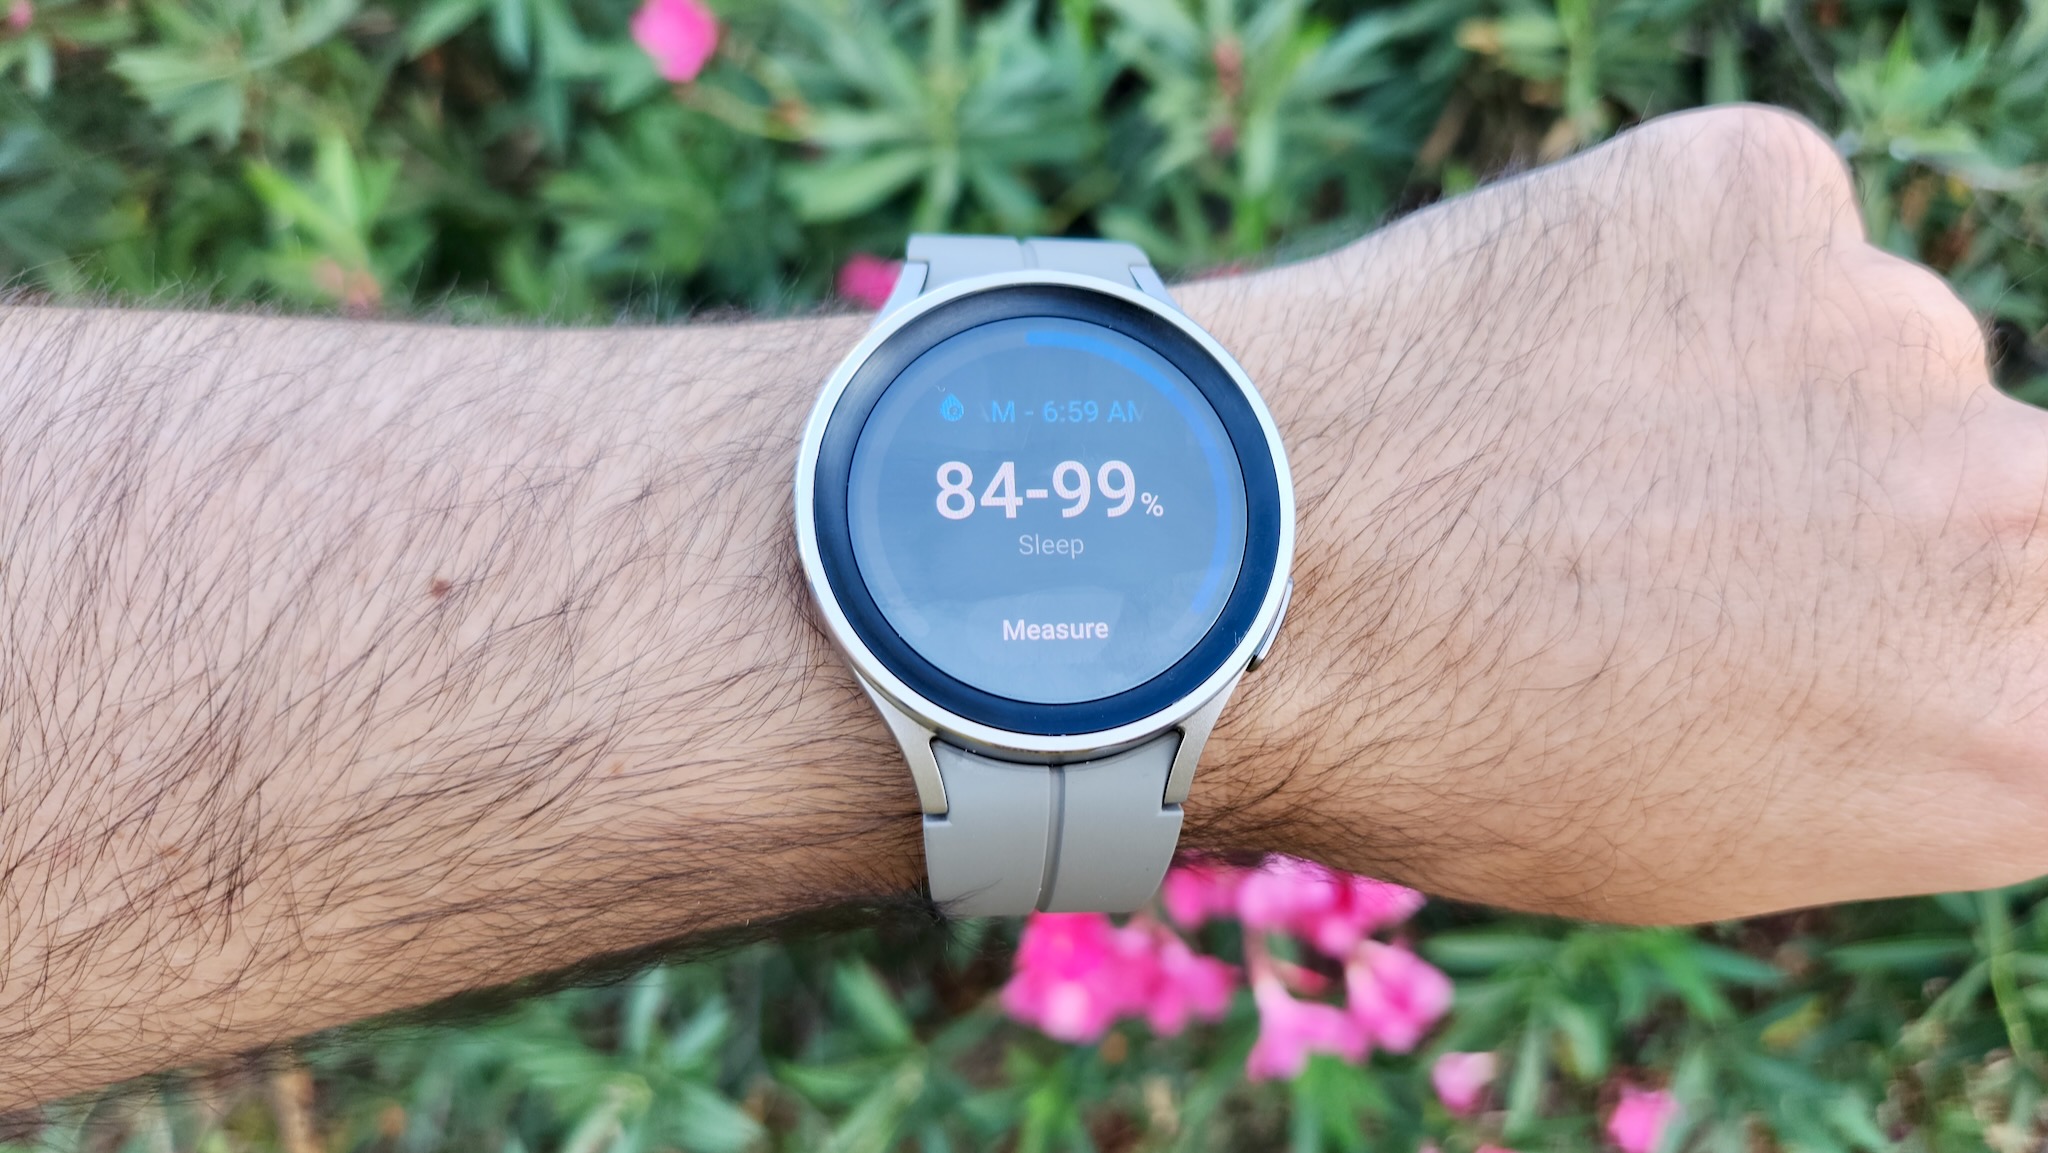 Samsung Galaxy Watch 5 Pro sleep tracking results showing blood oxygen levels